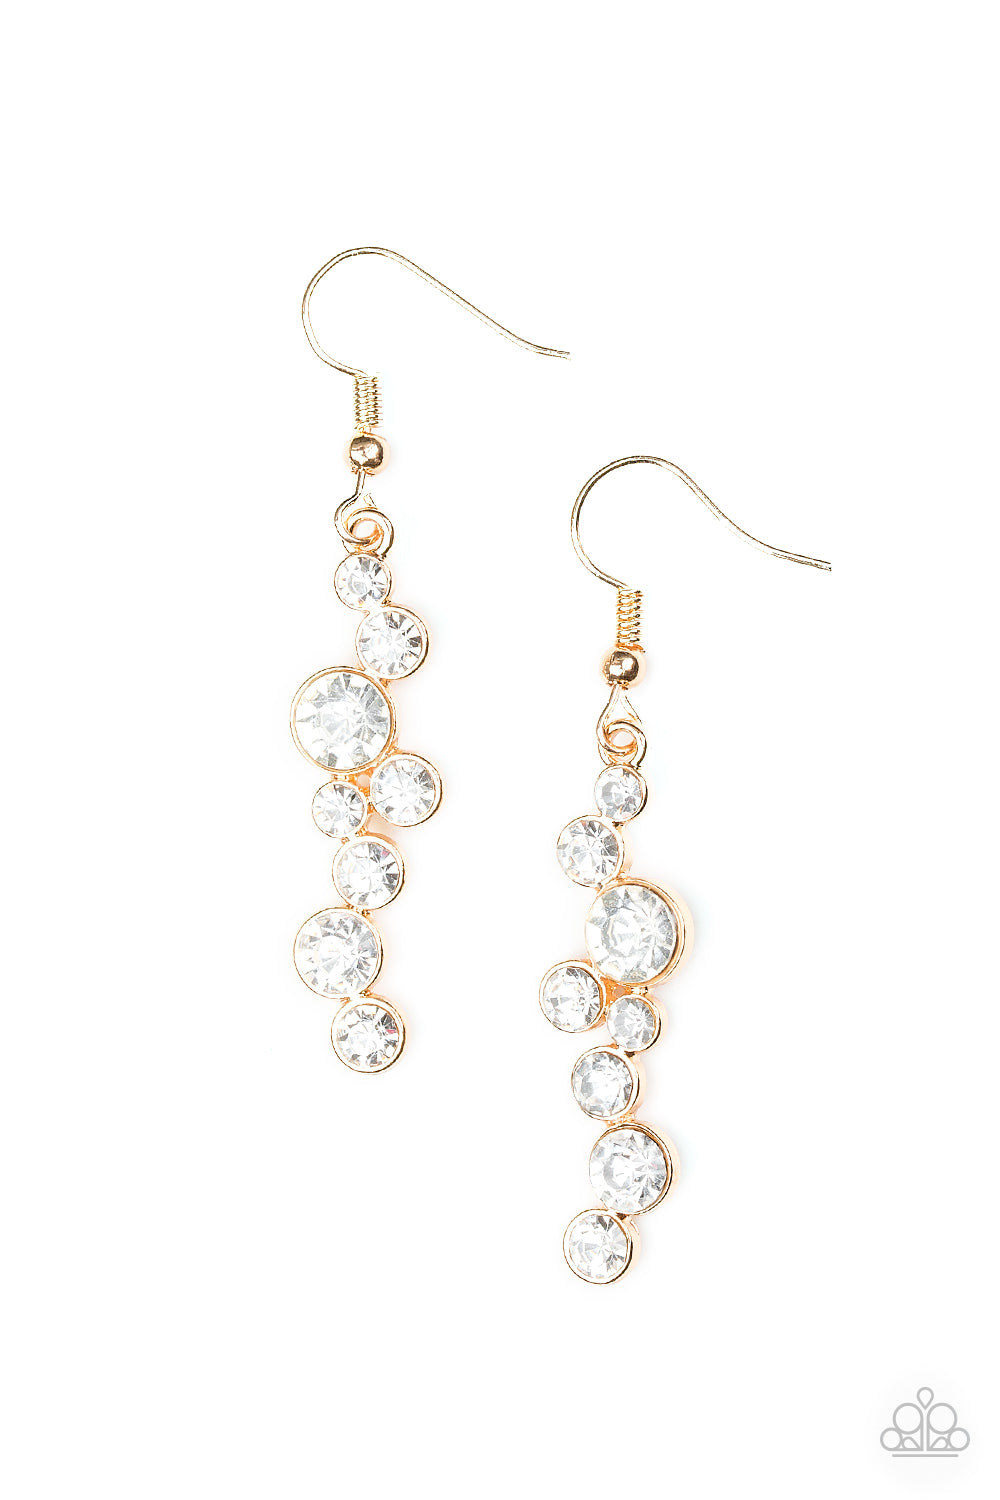 MILKY WAY MAGNIFICENCE - GOLD EARRING